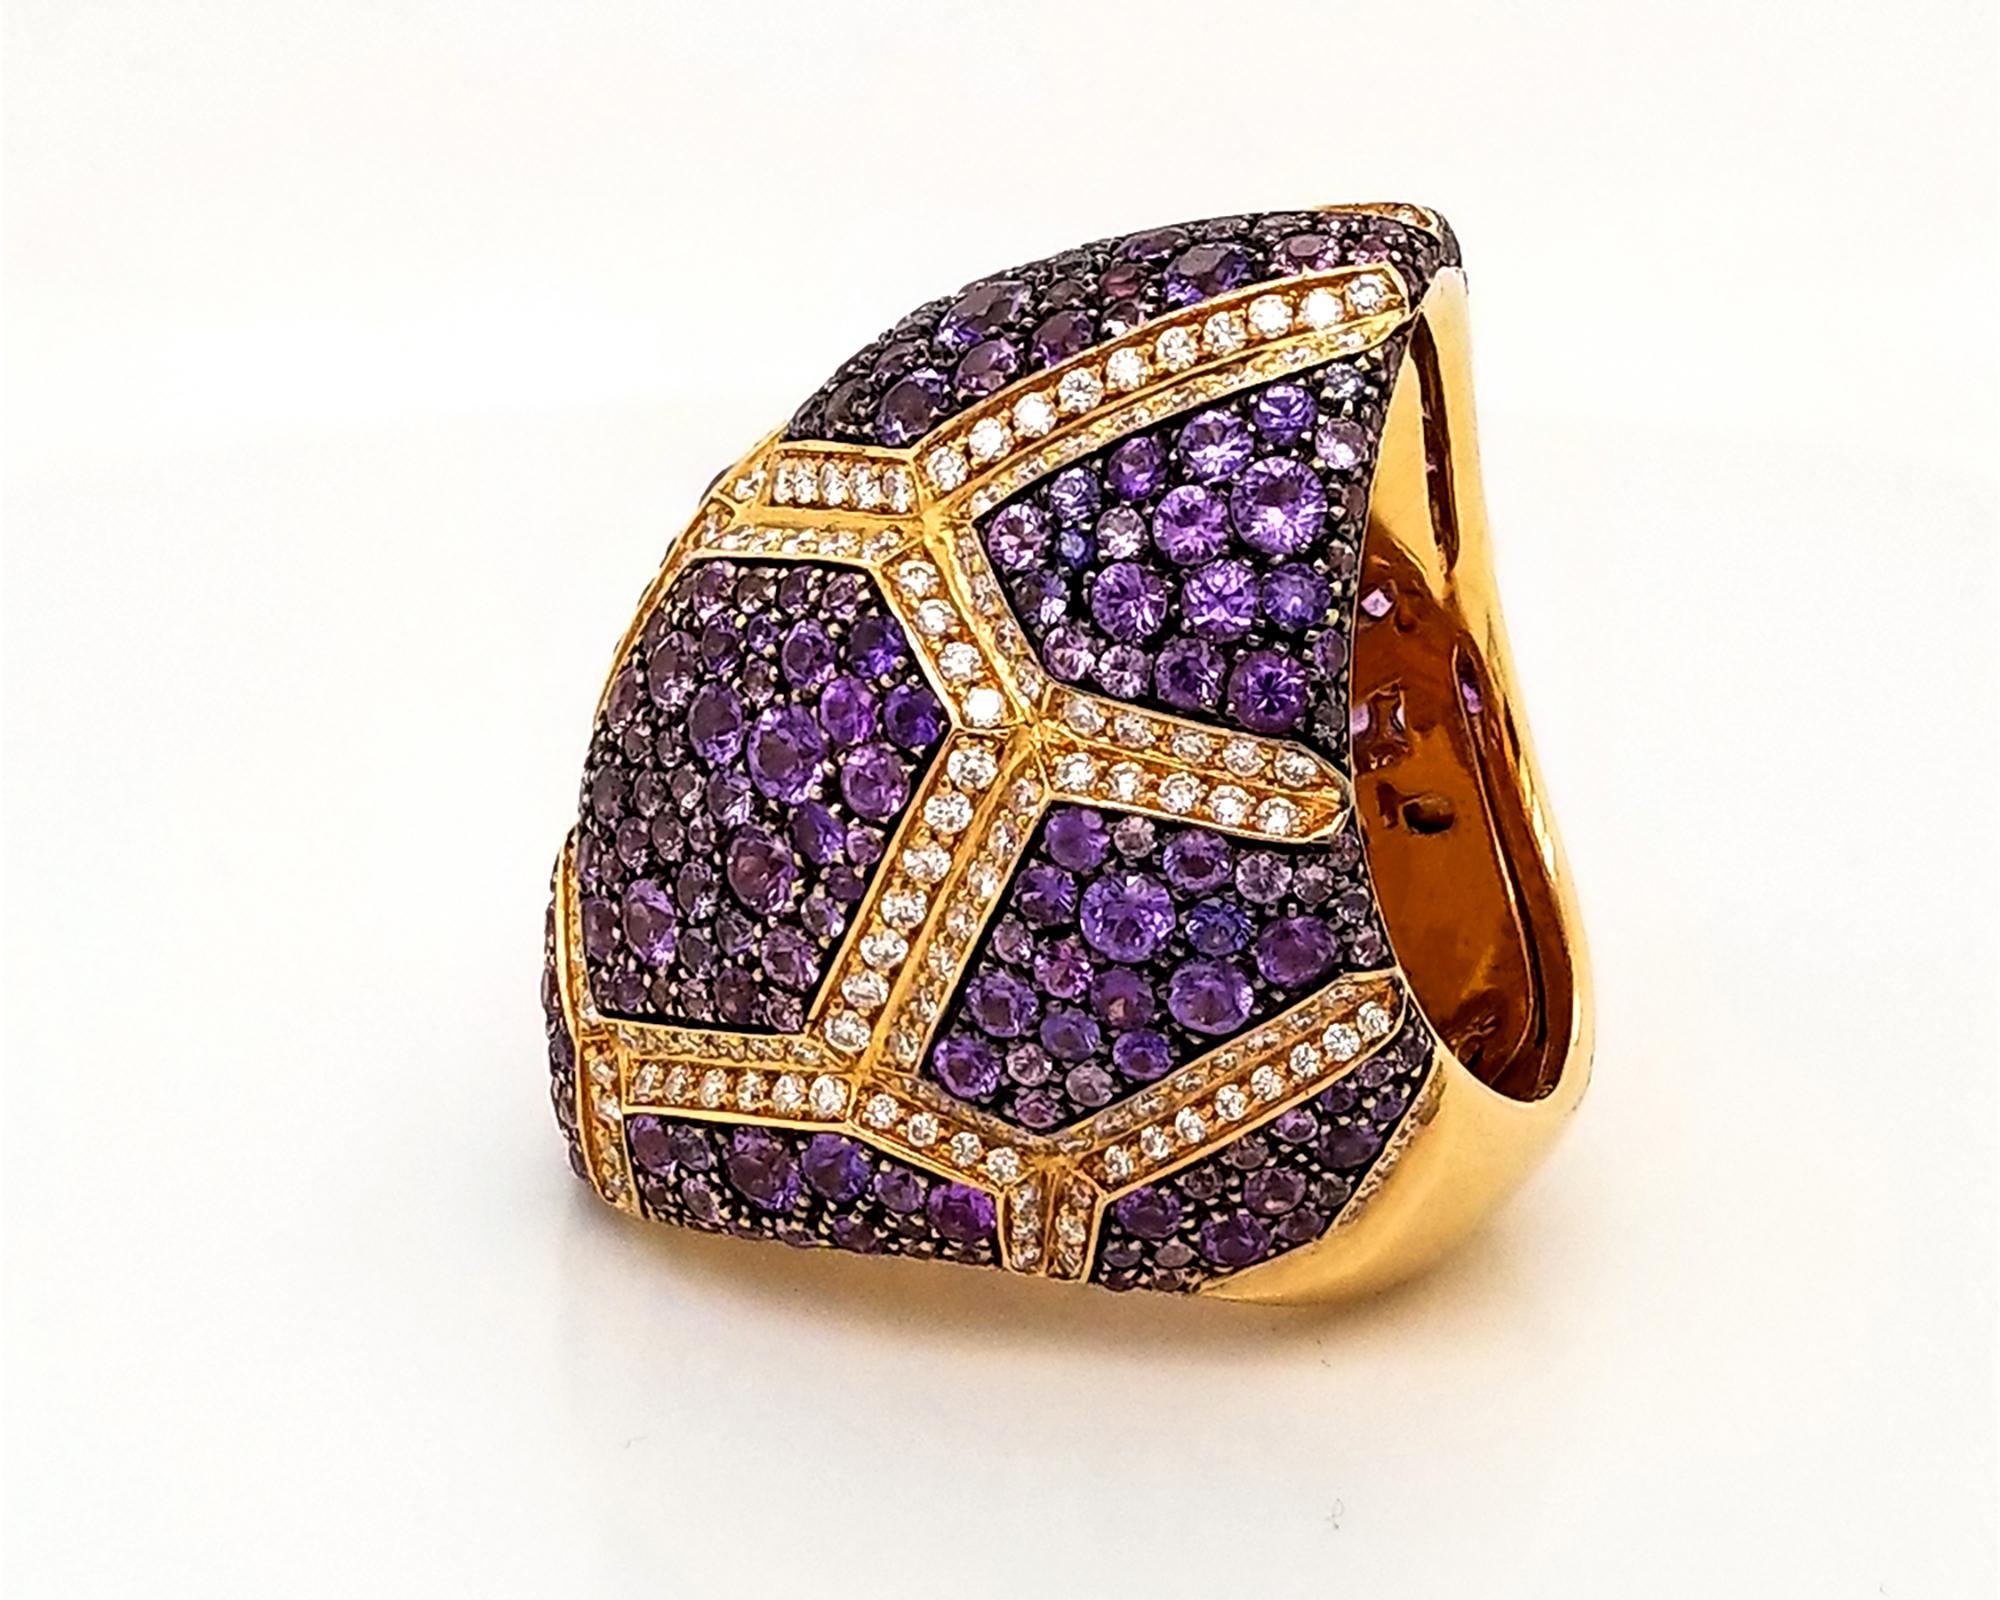 A stunning cocktail ring made my Italian jewelry maker company Palmiero. 
The ring is featuring 8.91 carats of sapphires and 1.86 carats of diamonds.
Mounted in 18K yellow gold weighing 28.13 grams. 
Size 7.
Retail price of the ring is US$25,948.
